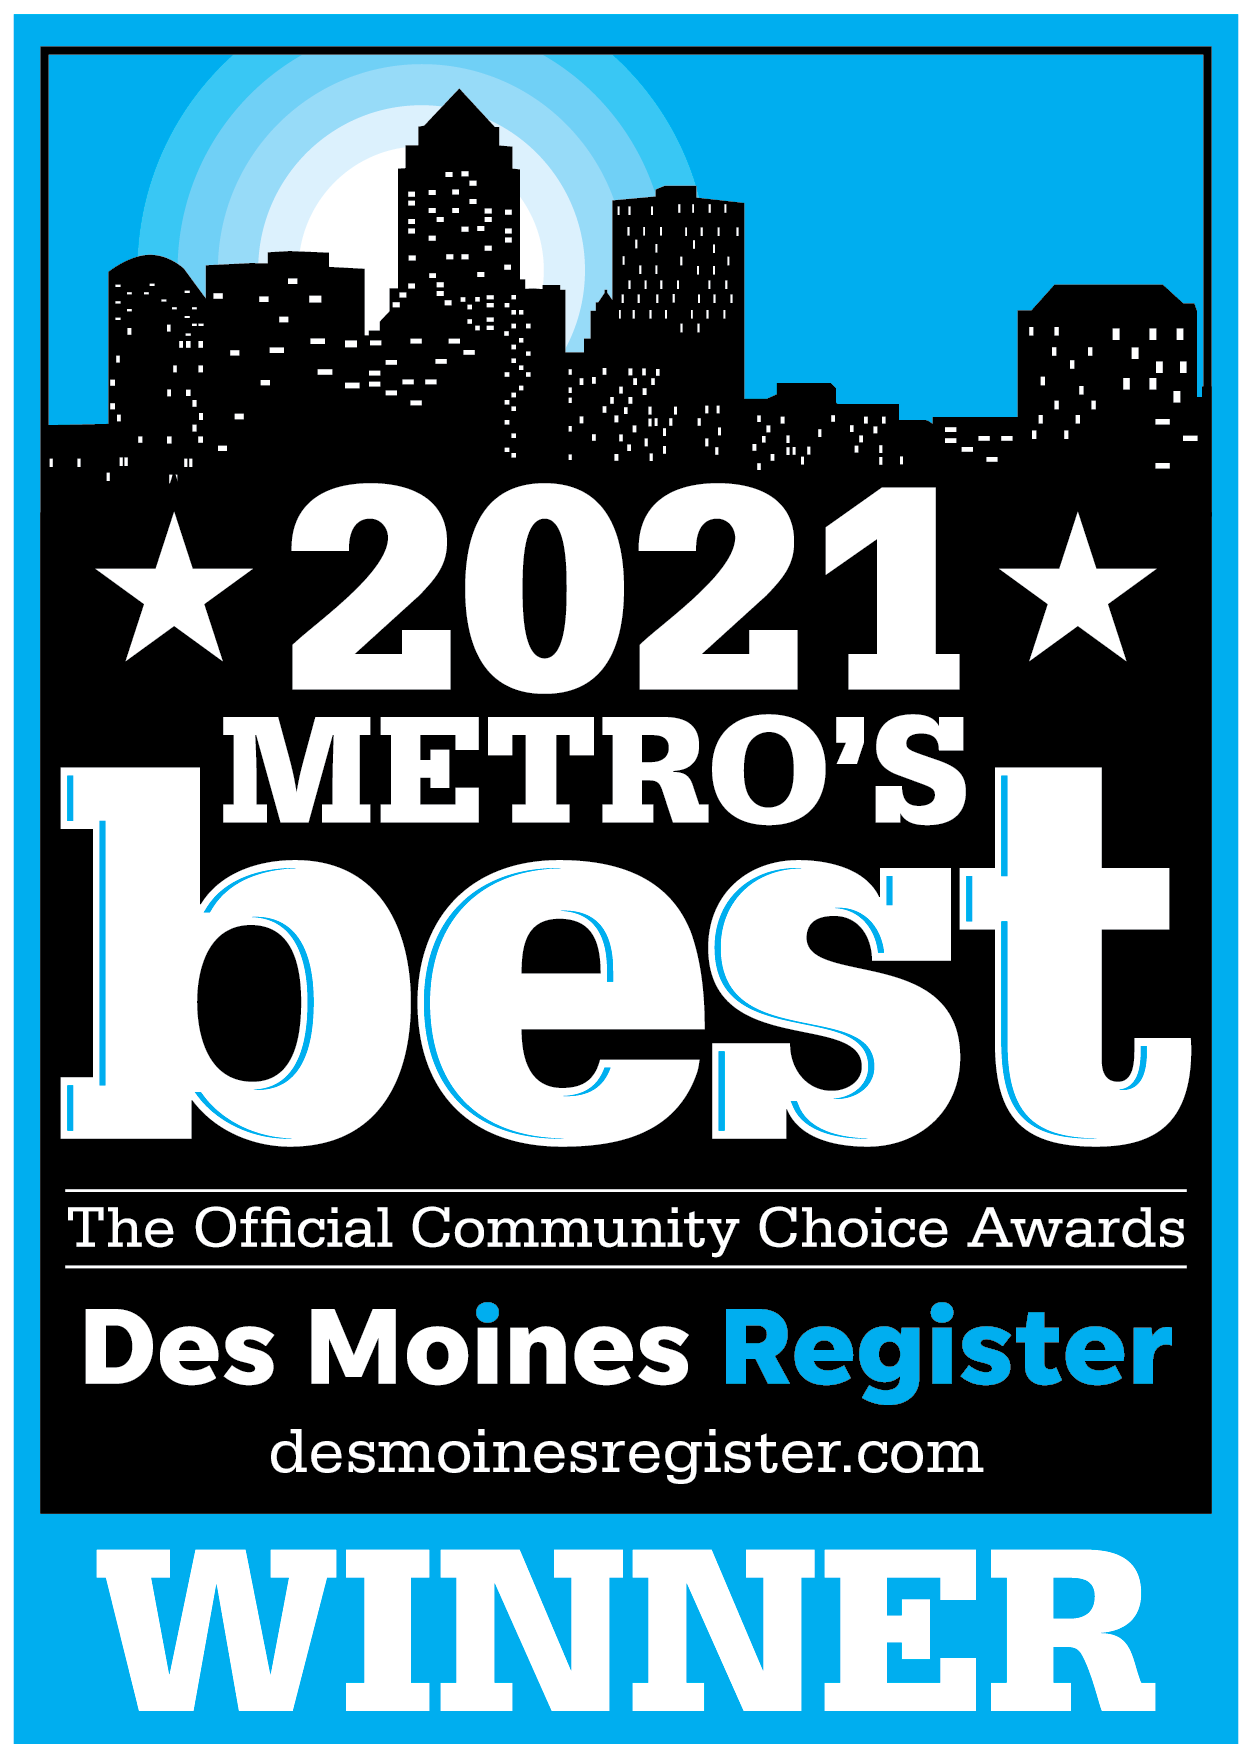 DES MOINES BEST TREE SERVICE 2021 TREEHUGGER COMPLETE TREE CARE